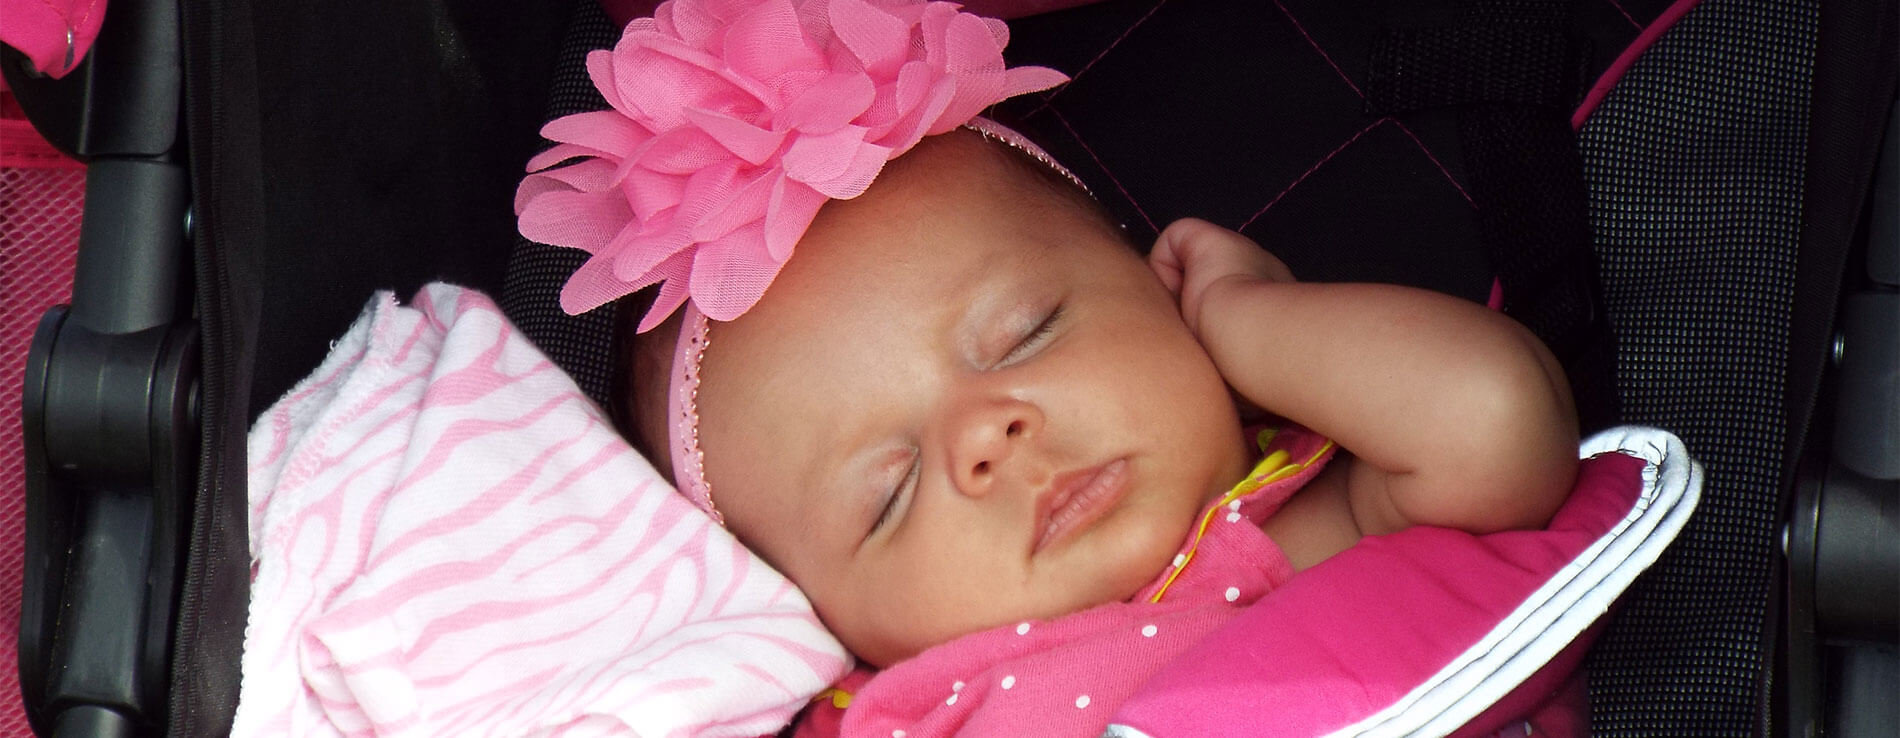 A sleeping baby in her car seat. She is snuggling a pink blanket and is wearing a pink hair band.